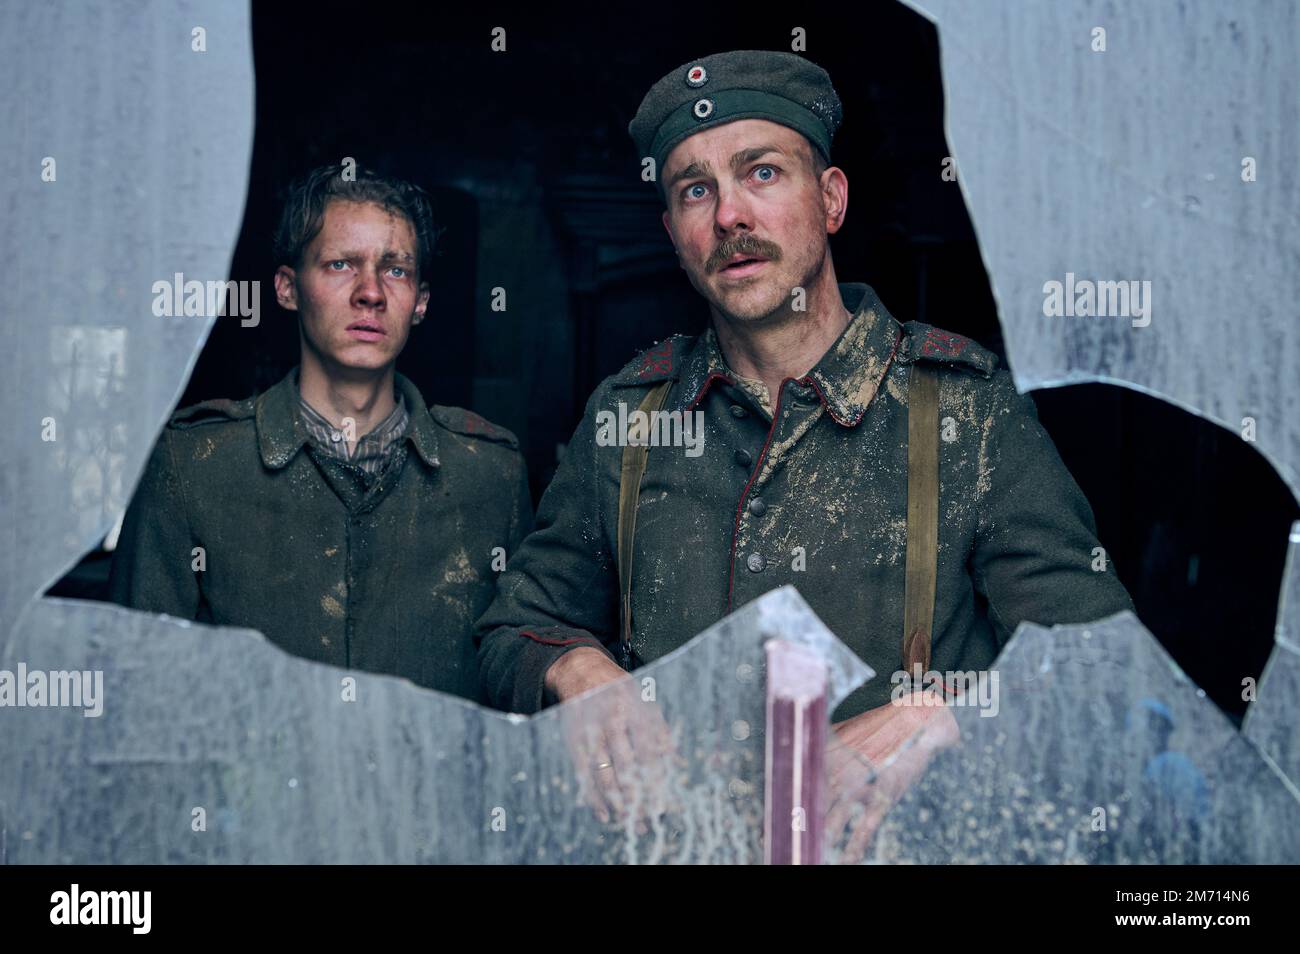 RELEASE DATE: October 28, 2022. TITLE: All Quiet On The Wester Front. STUDIO: Netflix. DIRECTOR: Edward Berger. PLOT: A young German soldier's terrifying experiences and distress on the western front during World War I. STARRING: FELIX KAMMERER as Paul Baumer, ALBRECHT SCHUCH as Stanislaus Katczinsky. (Credit Image: © Netflix/Entertainment Pictures) Stock Photo